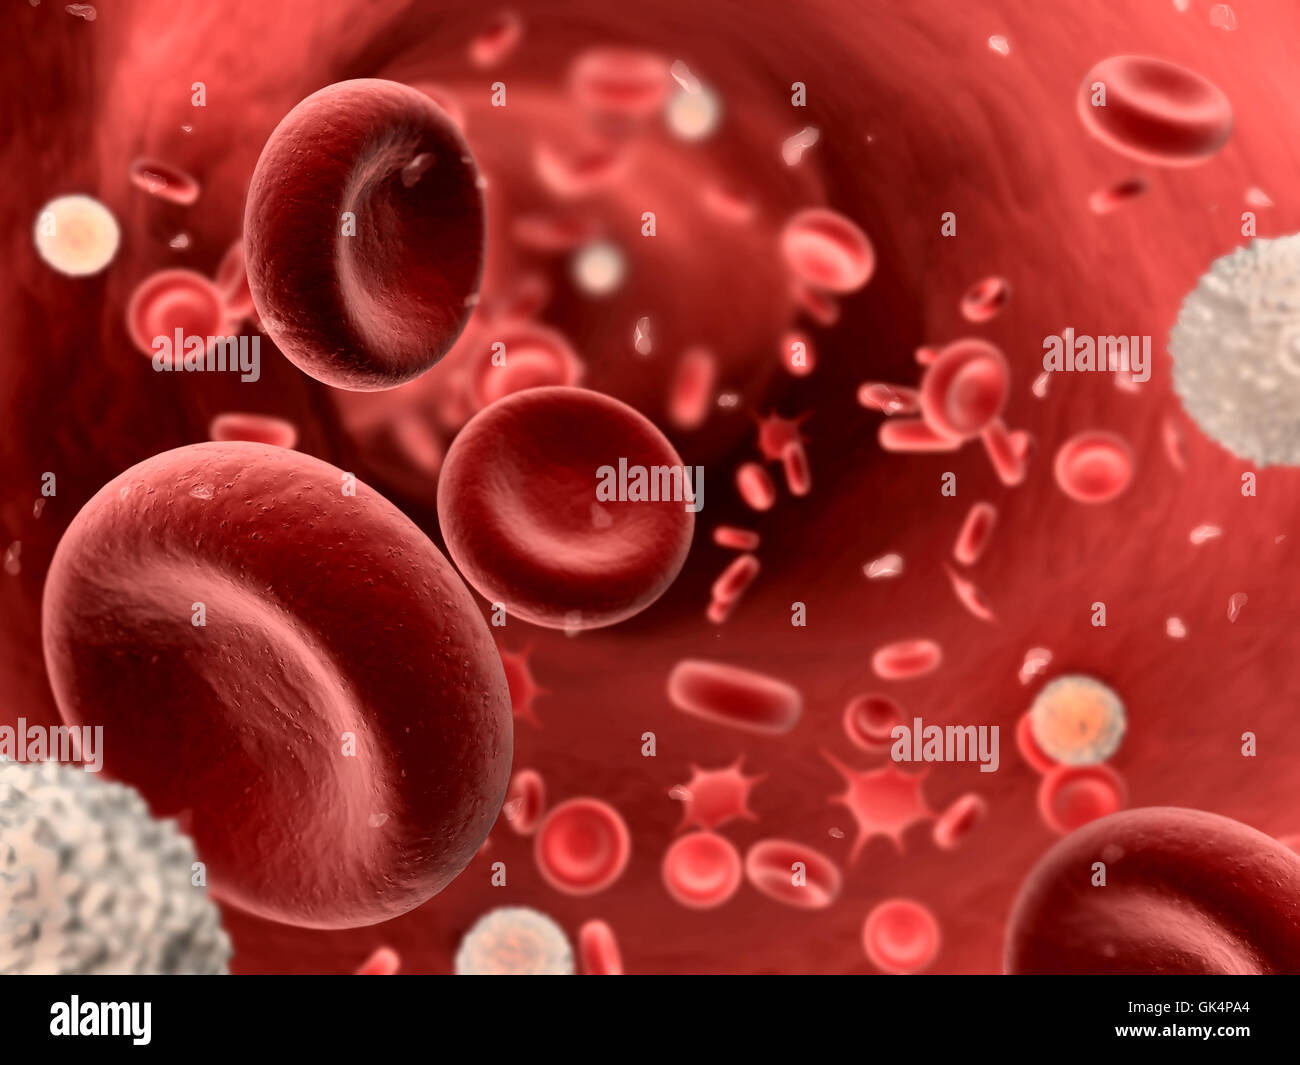 blood artery microbiology Stock Photo